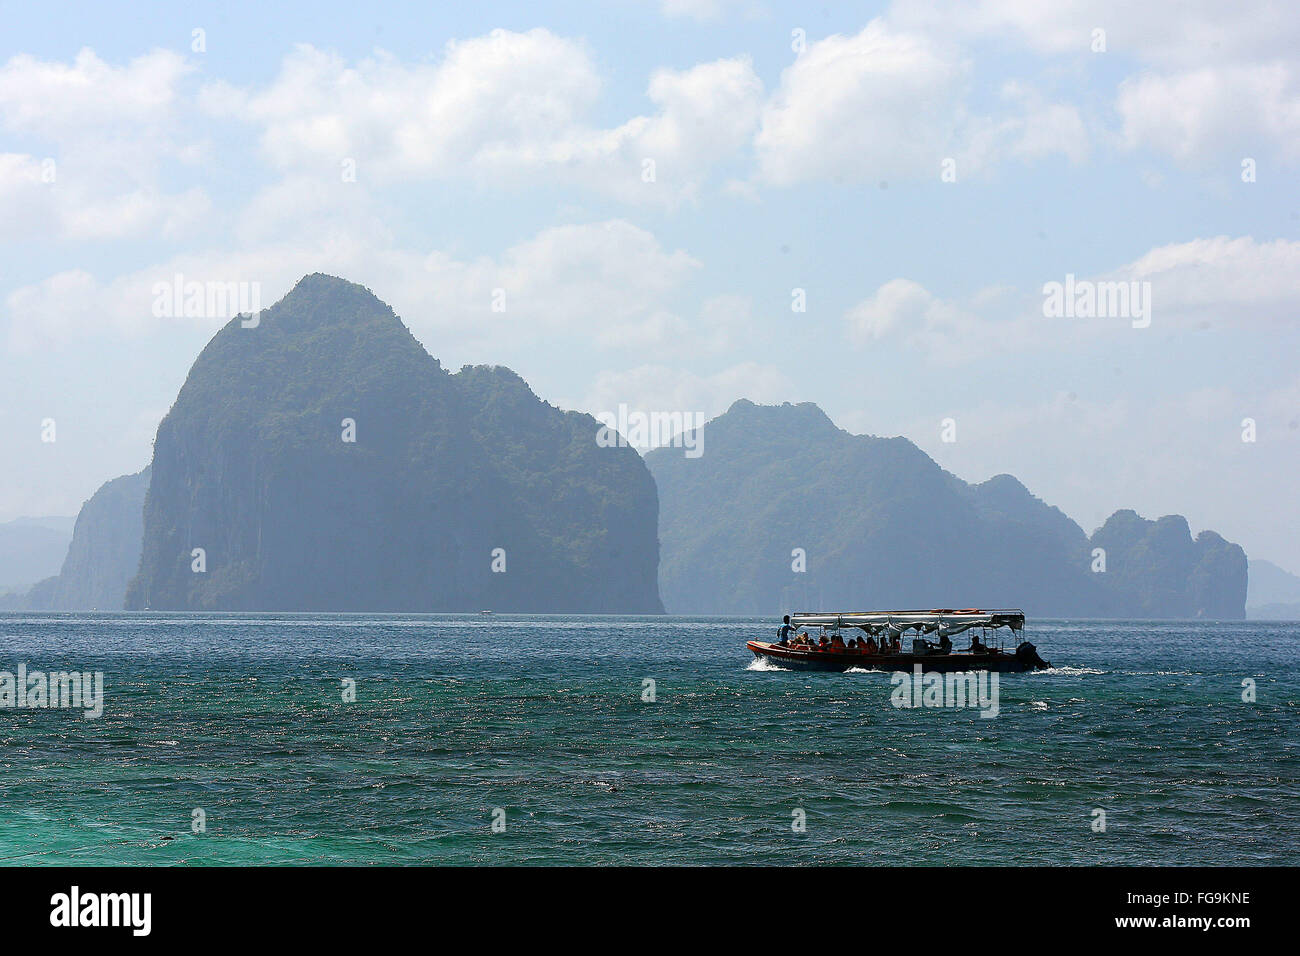 (160218) -- PALAWAN PROVINCE, Feb. 18, 2016 (Xinhua) -- A ferry carrying tourists sails in Palawan Province, the Philippines, Feb. 18, 2016. Tourism revenues are expected to reach 6.5 billion U.S. dollars from the arrivals of six million foreign visitors in 2016 according to the Philippine Department of Tourism. (Xinhua/Rouelle Umali) Stock Photo